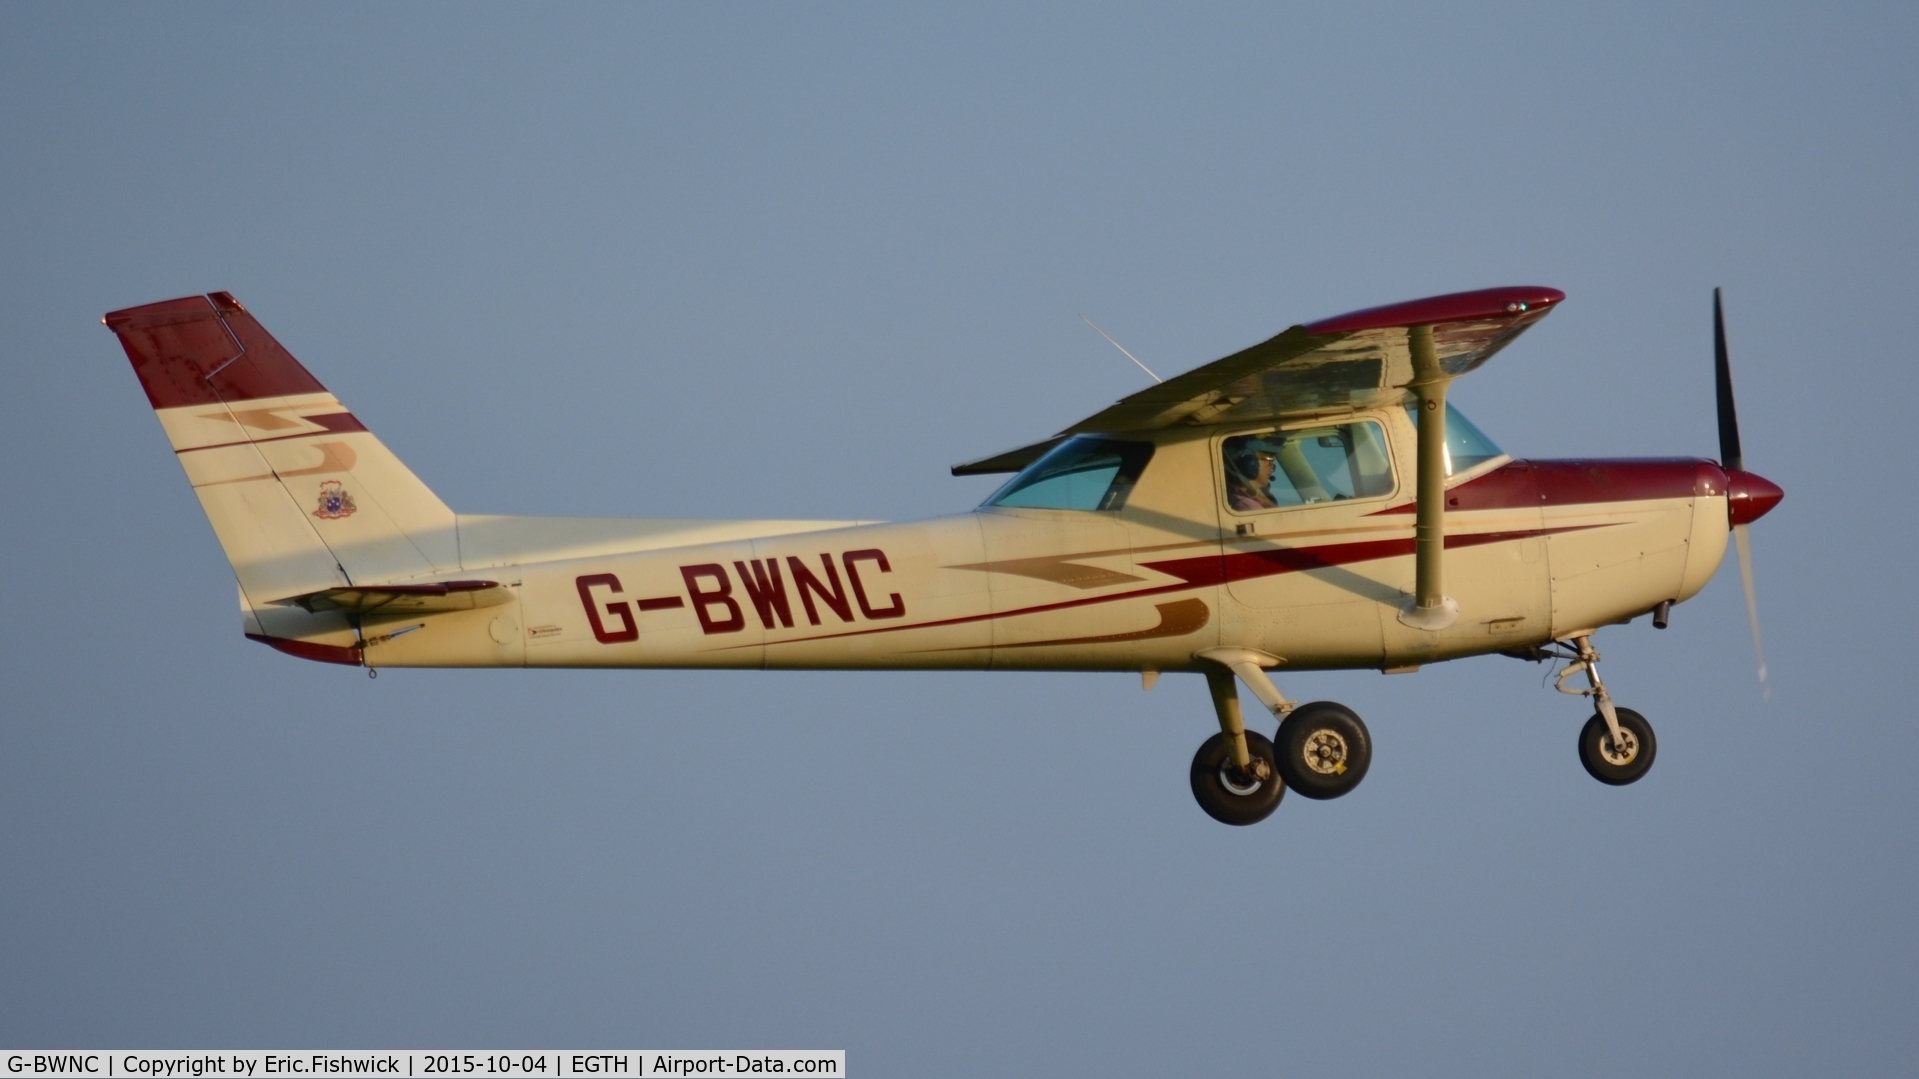 G-BWNC, 1980 Cessna 152 C/N 152-84415, 42. G-BWNC departing The Shuttleworth 'Uncovered' Airshow (Finale,) Oct. 2015.